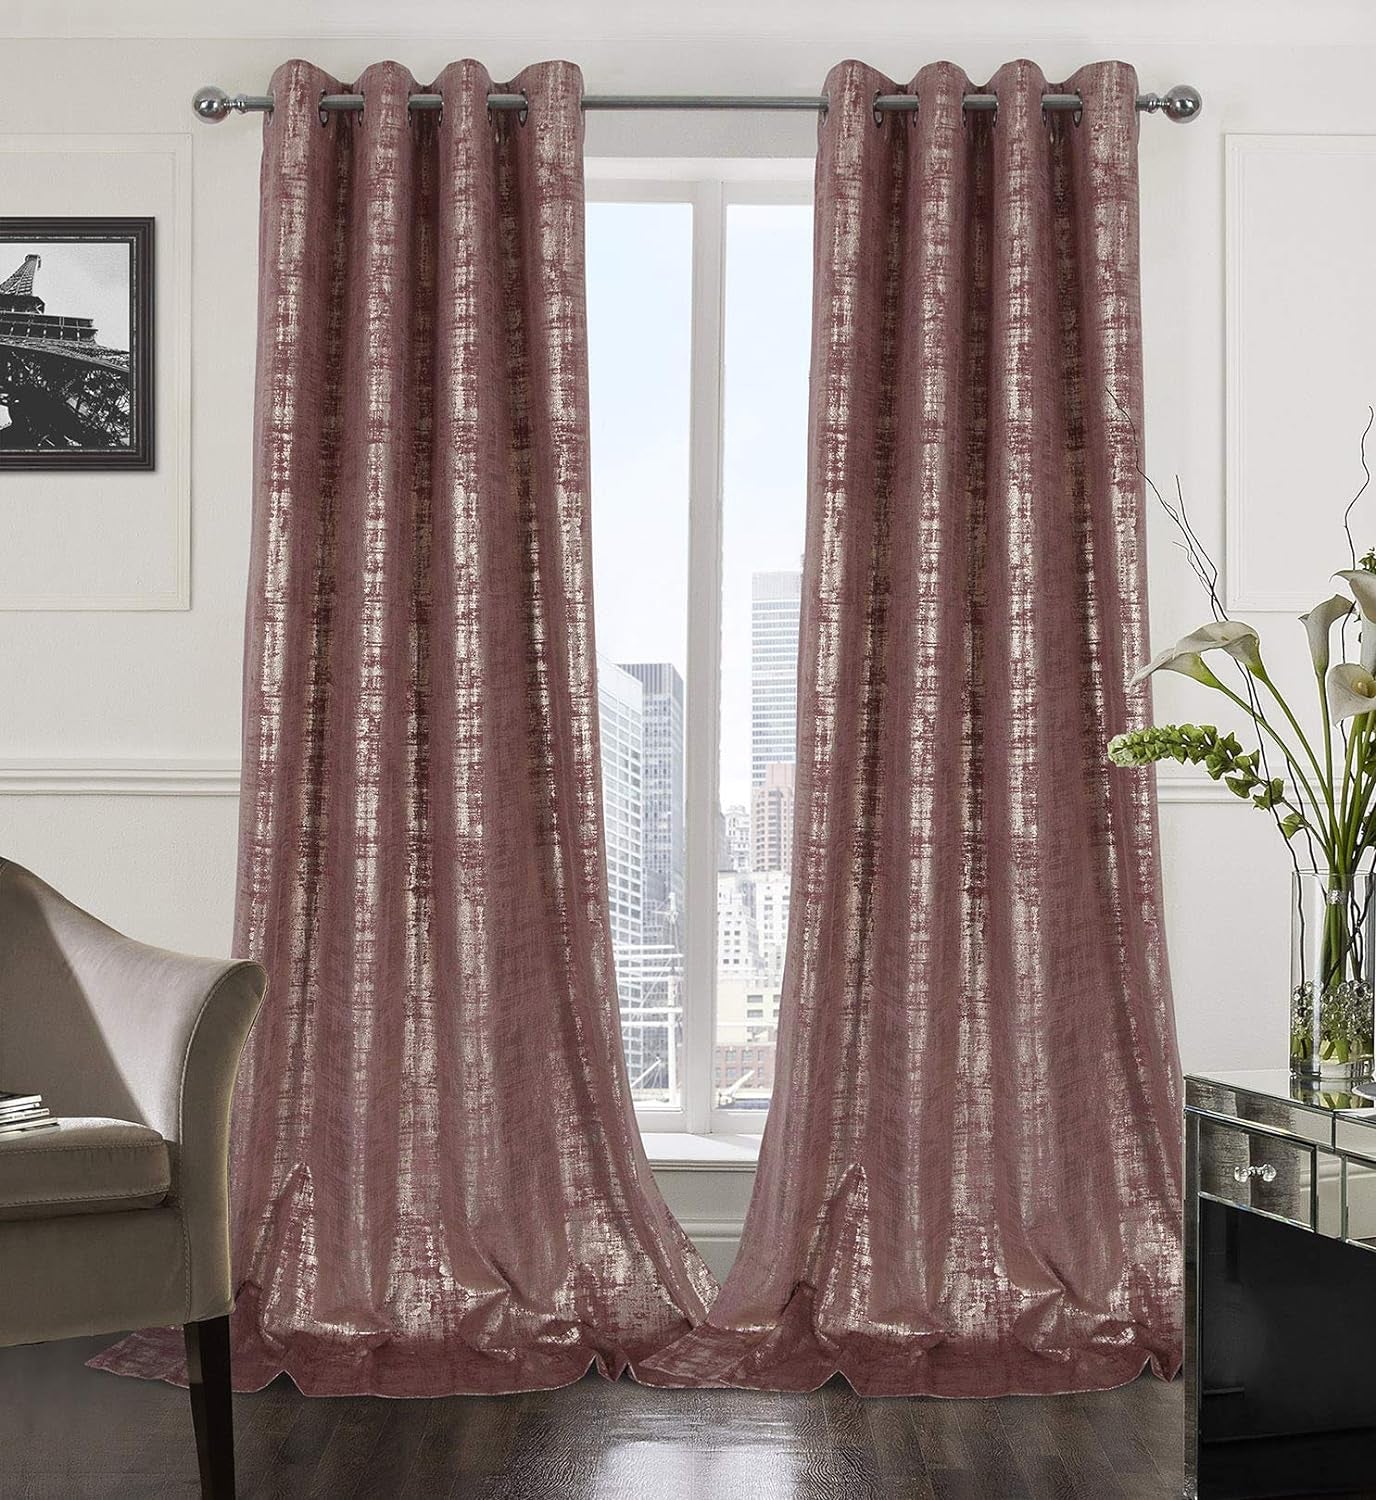 Always4U Soft Velvet Curtains 95 Inch Length Luxury Bedroom Curtains Gold Foil Print Window Curtains for Living Room 1 Panel White  always4u Wild Rose (Gold Print) 2 Panels: 52''W*108''L 